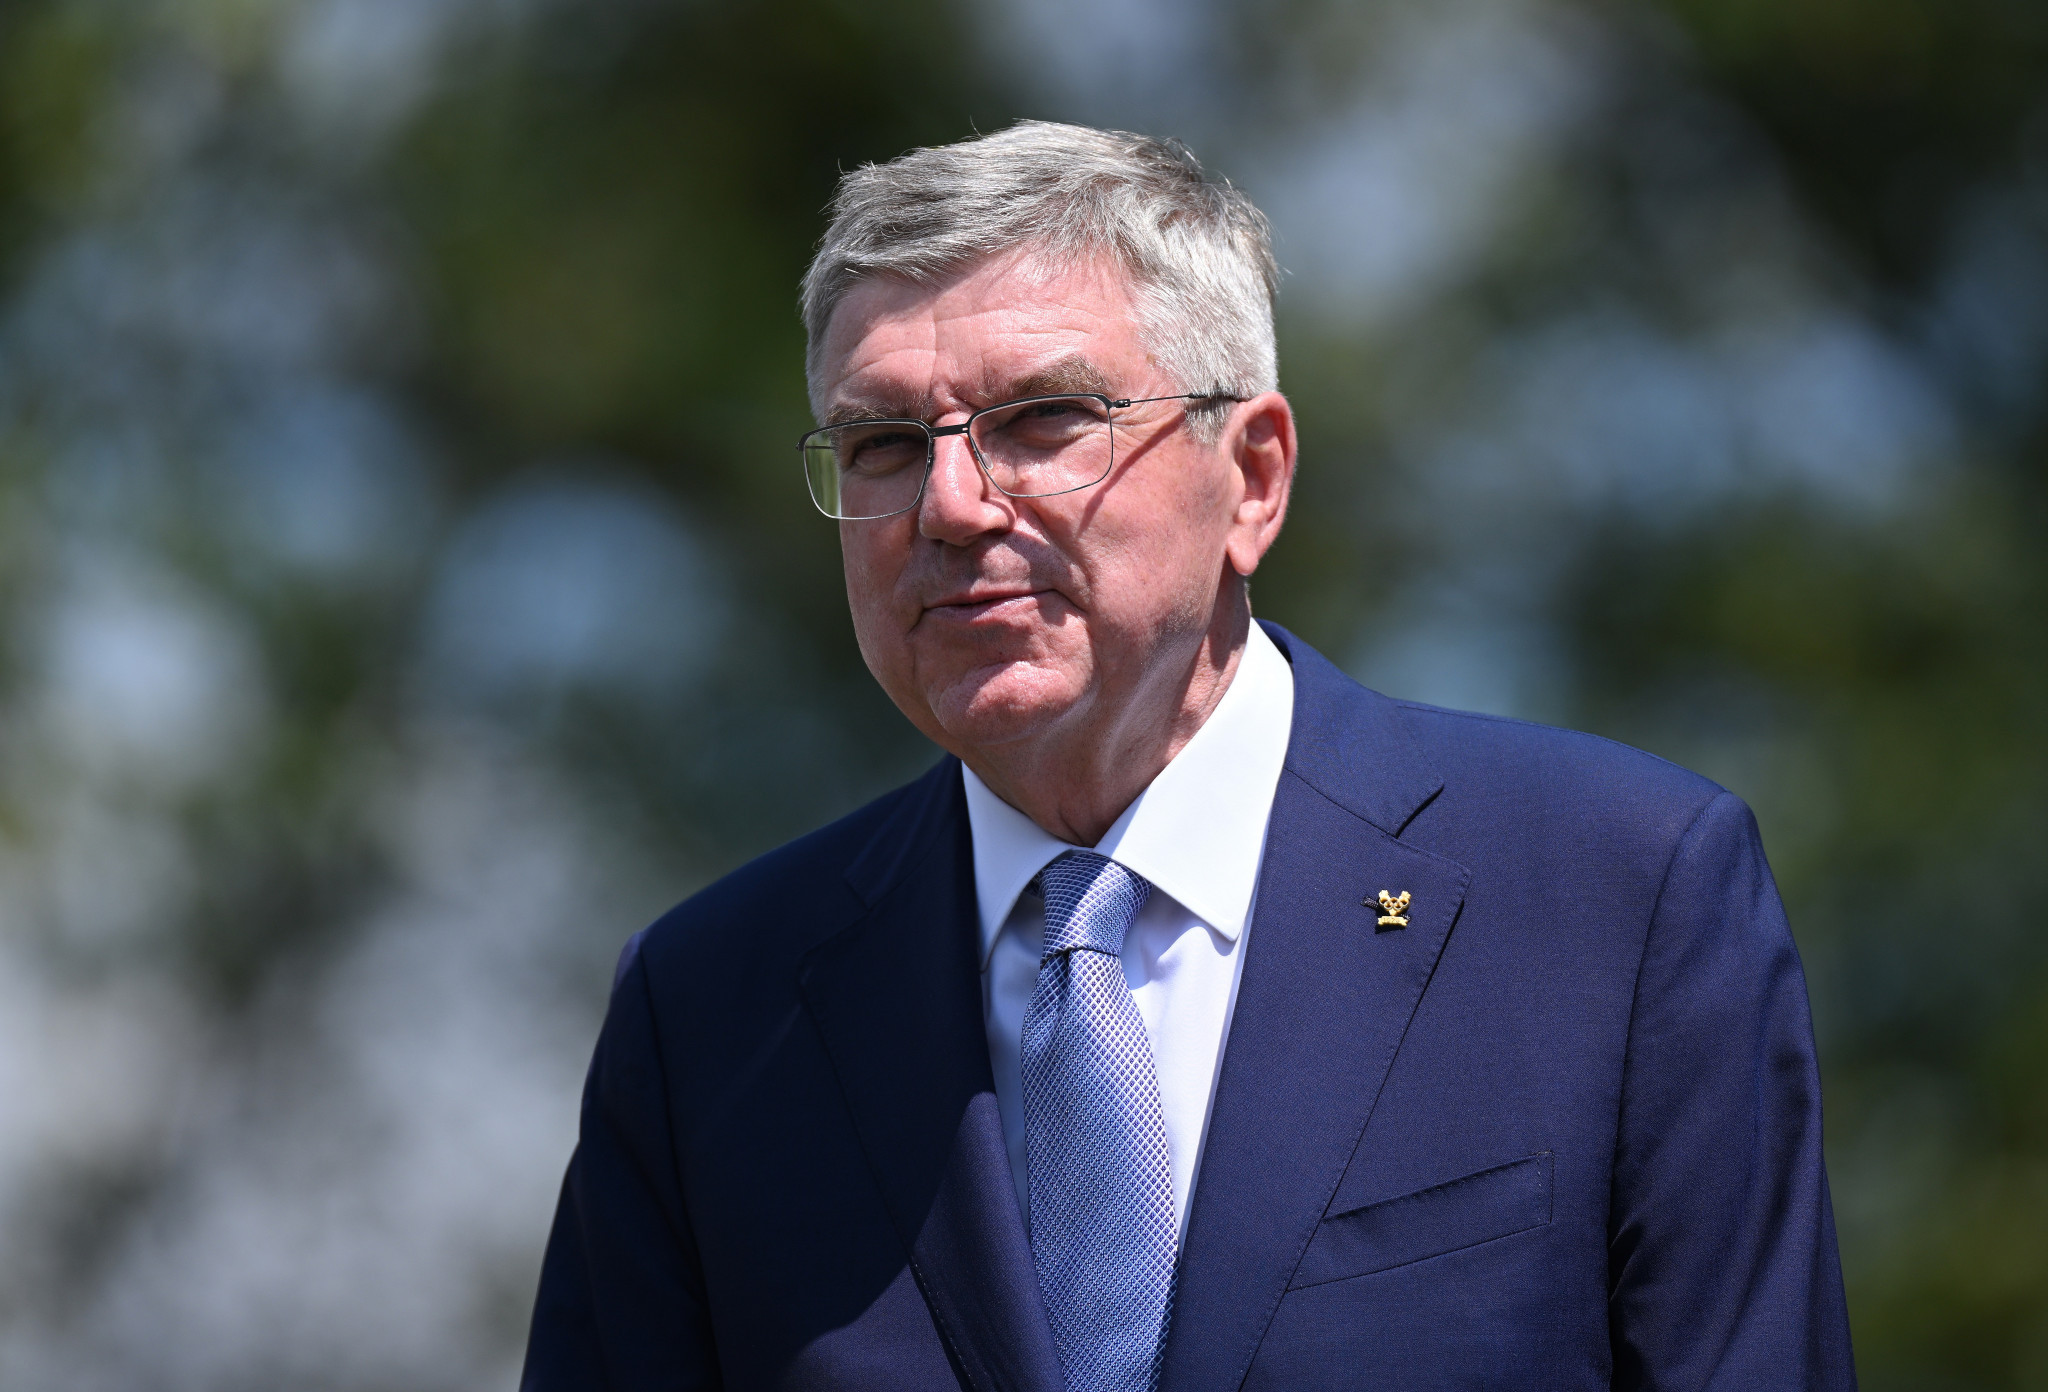 IOC President Thomas Bach is set to attend the Dakar en Jeux Festival ©Getty Images 